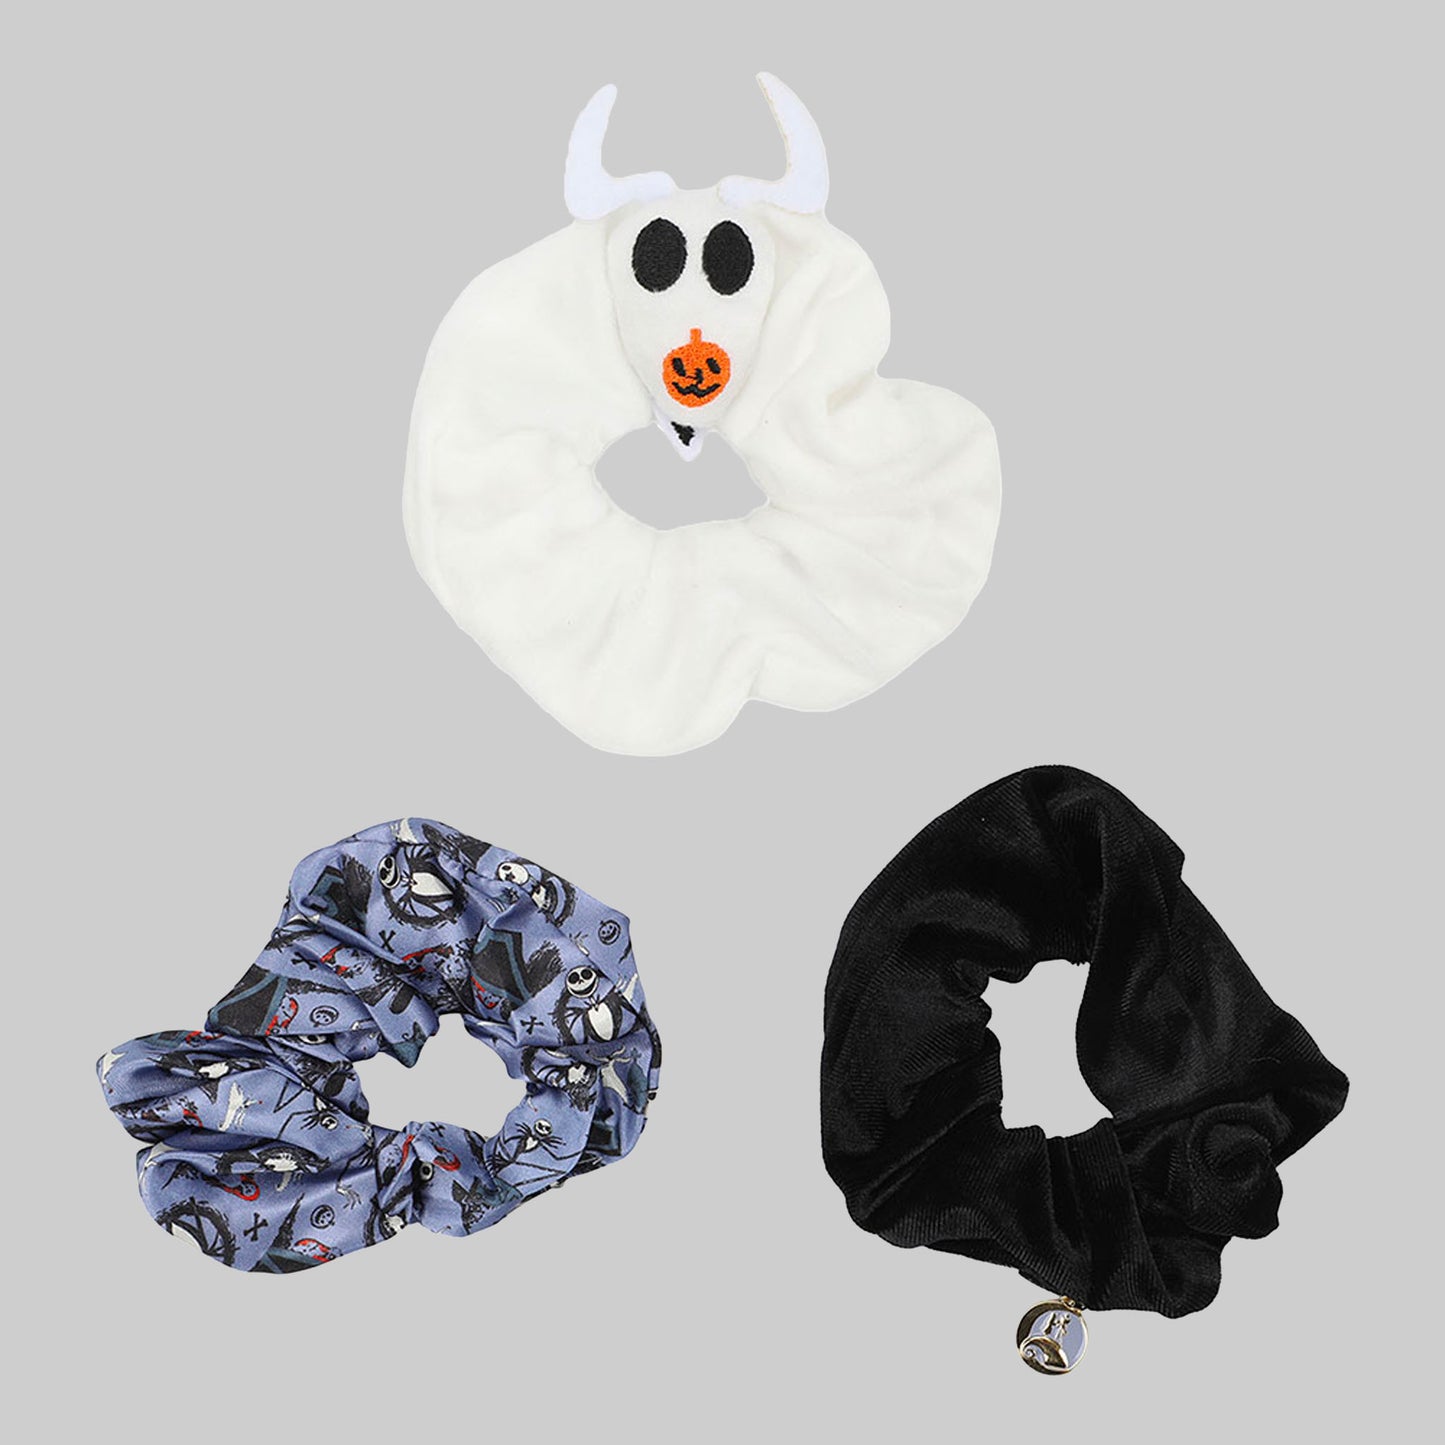 The Nightmare Before Christmas Scrunchies Set